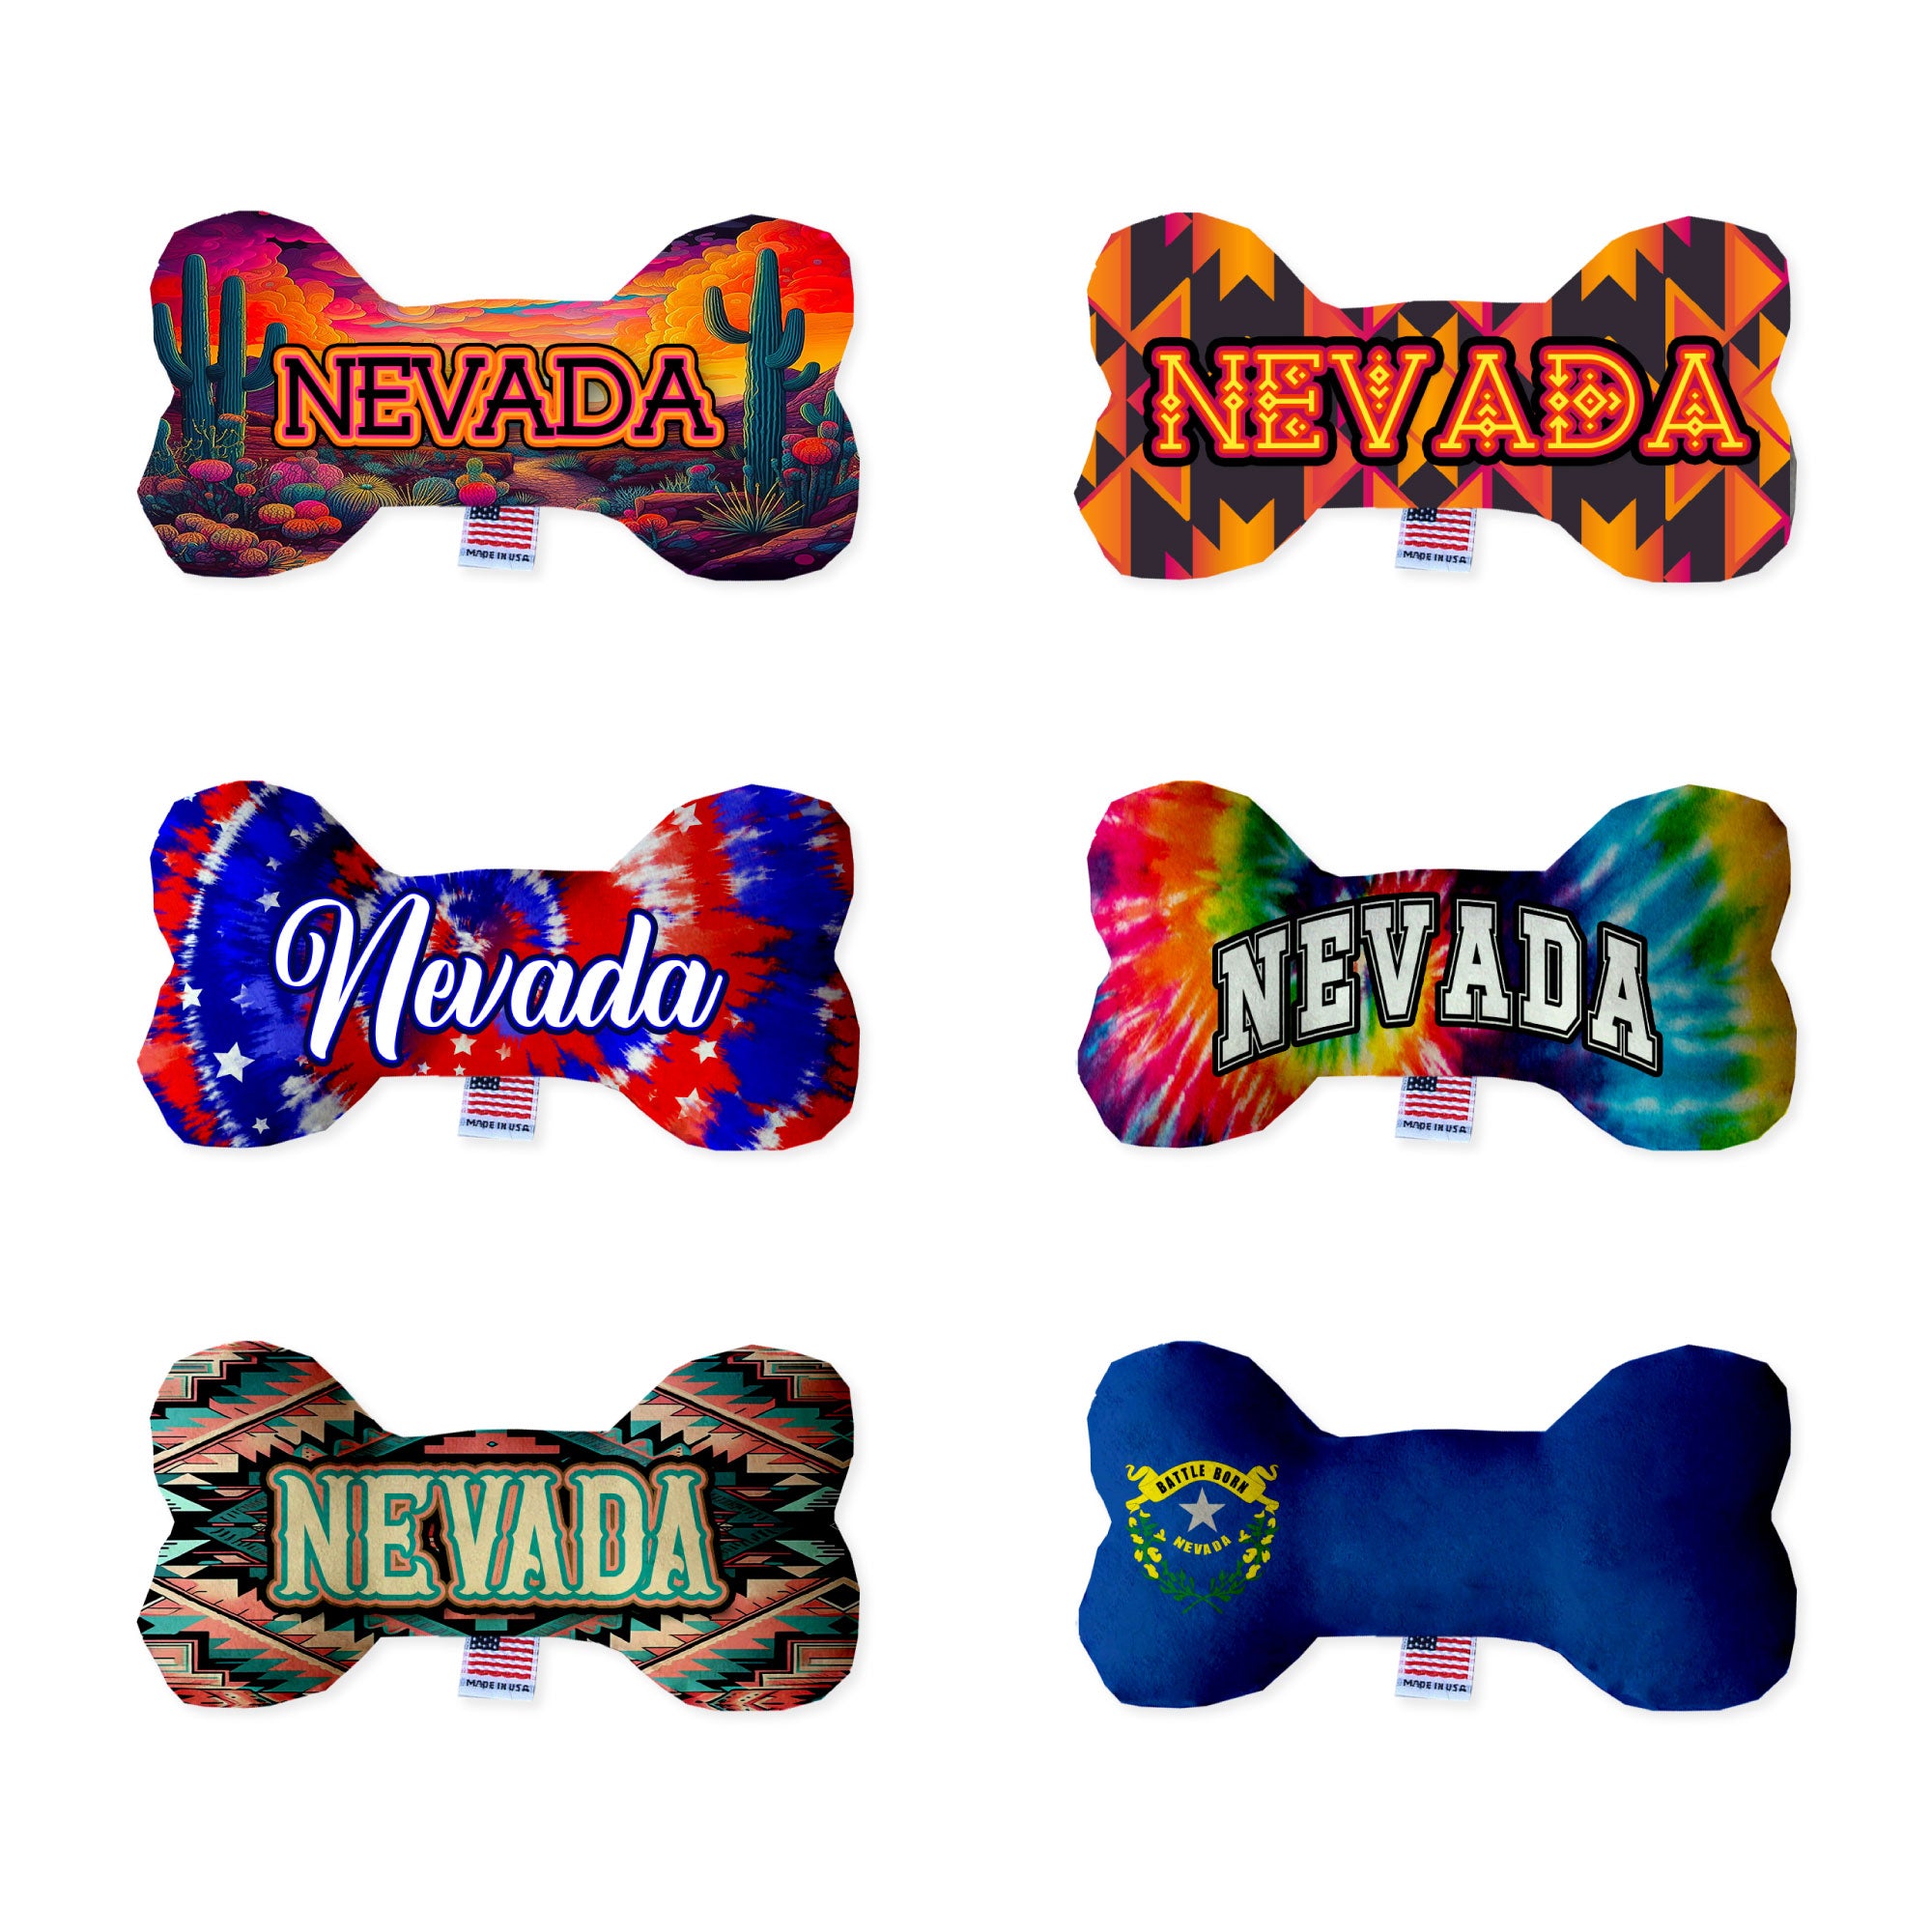 Nevada Pet Products